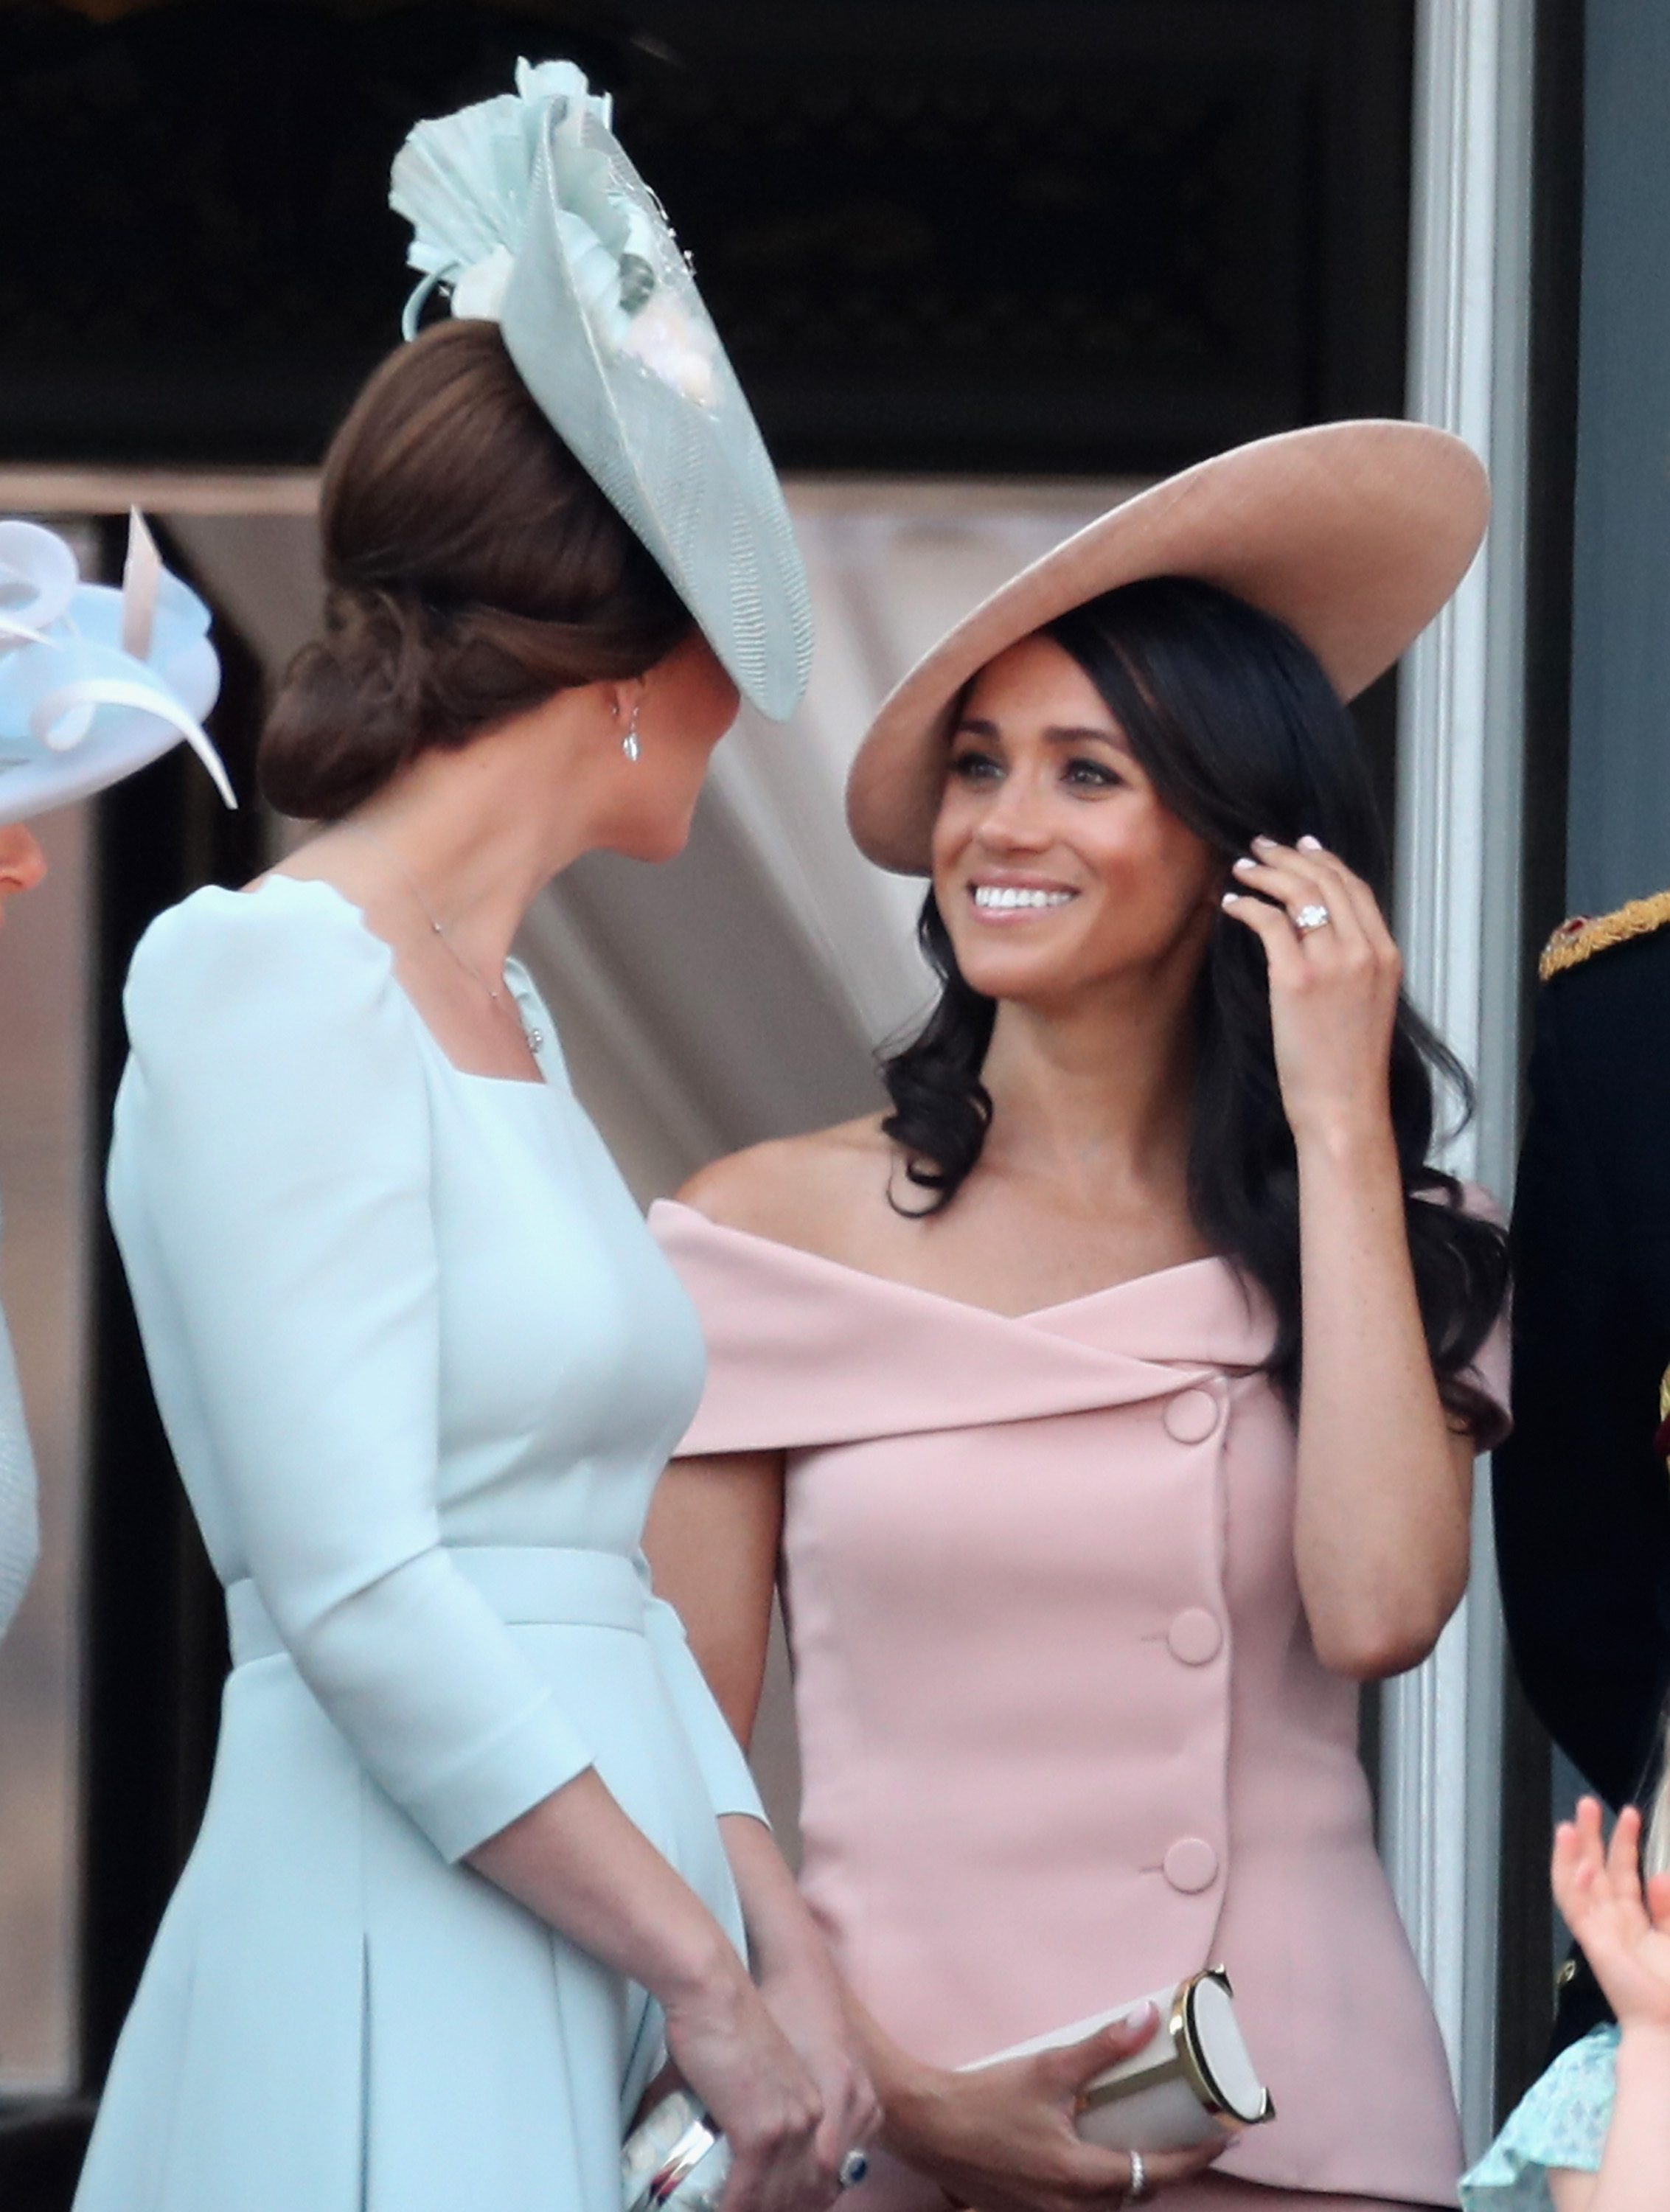 LONDON, ENGLAND - JUNE 09: Meghan, Duchess of Sussex and Catherine, Duchess of Cambridge watch the flypast on the balcony of Buckingham Palace during Trooping The Colour on June 9, 2018 in London, England. The annual ceremony involving over 1400 guardsmen and cavalry, is believed to have first been performed during the reign of King Charles II. The parade marks the official birthday of the Sovereign, even though the Queen's actual birthday is on April 21st. (Photo by Chris Jackson/Getty Images)